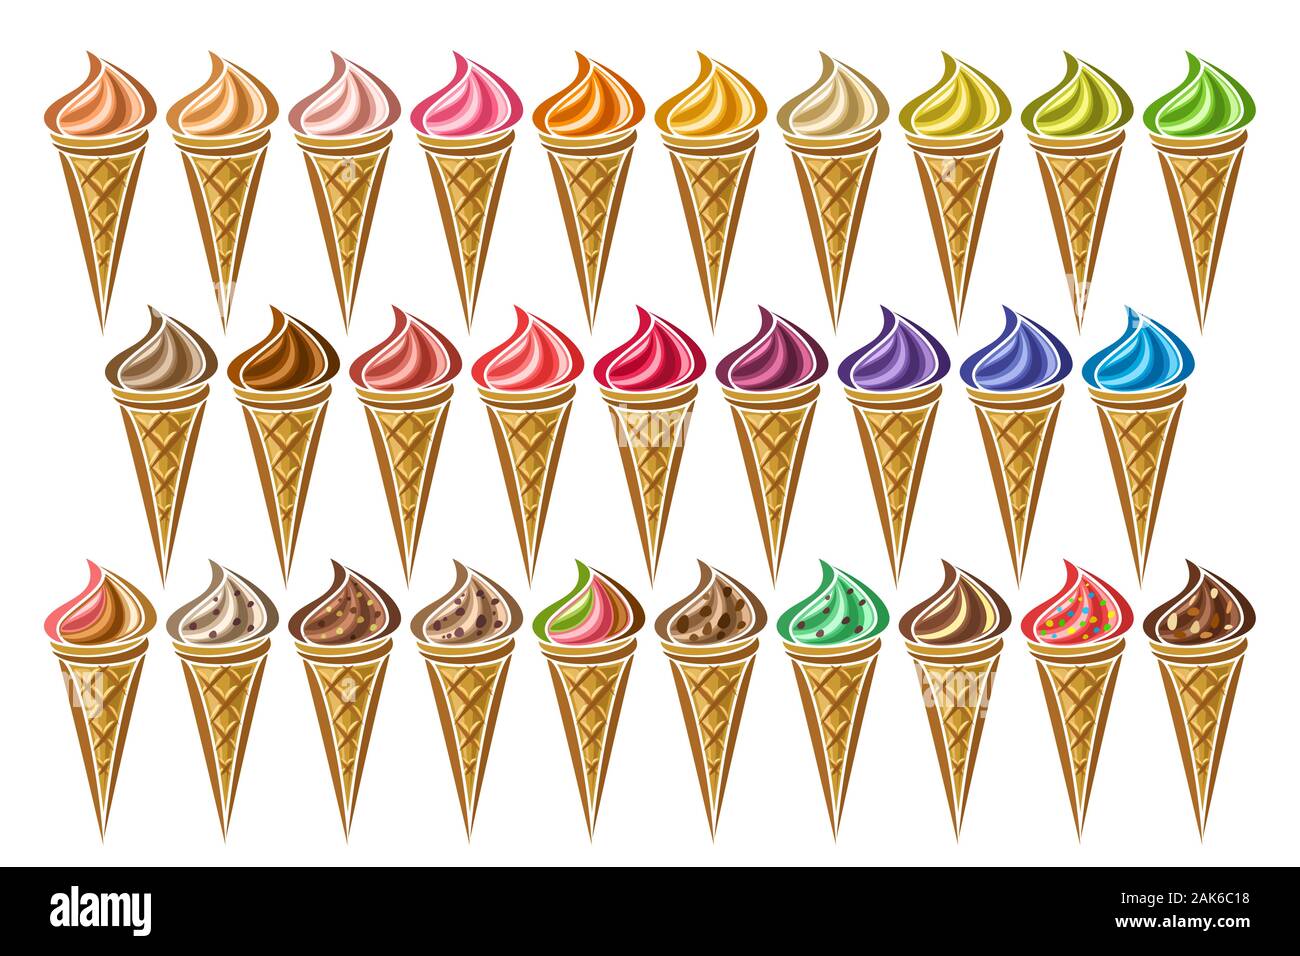 Vector set of Ice Creams Cones, 29 cut out illustration of delicious icecreams on white background, collection of tasty frozen ice creams in waffle co Stock Vector